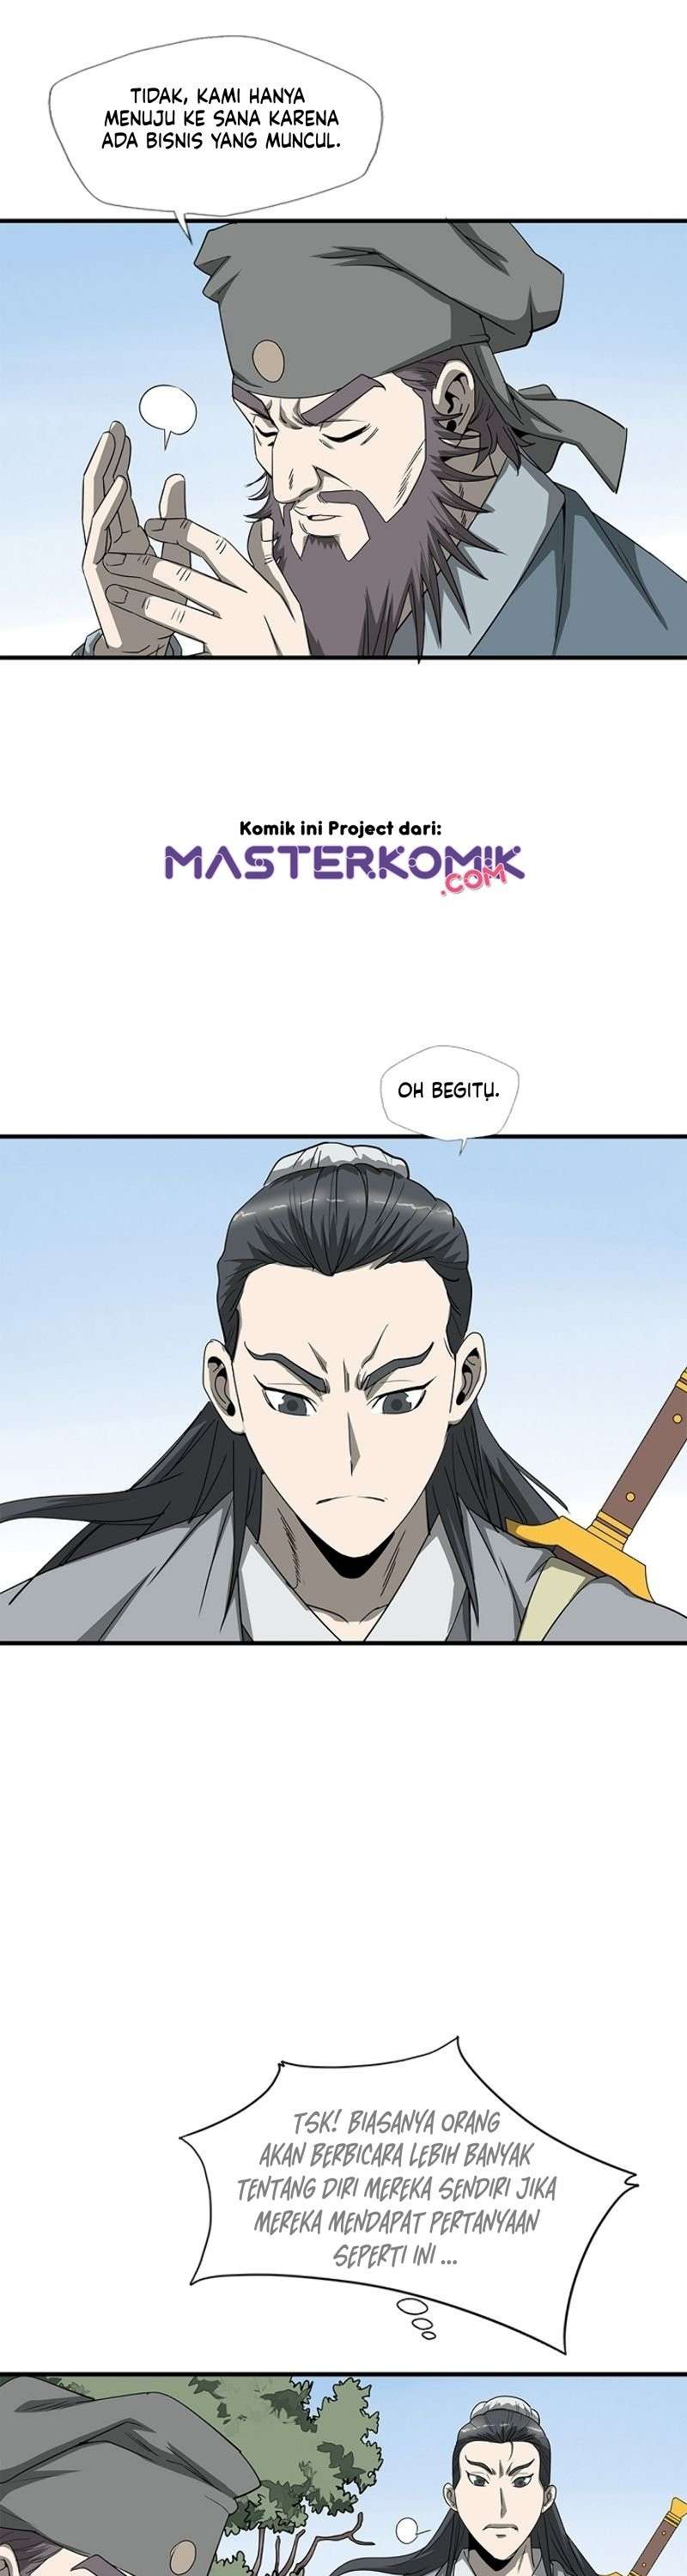 Strong Gale, Mad Dragon Chapter 30